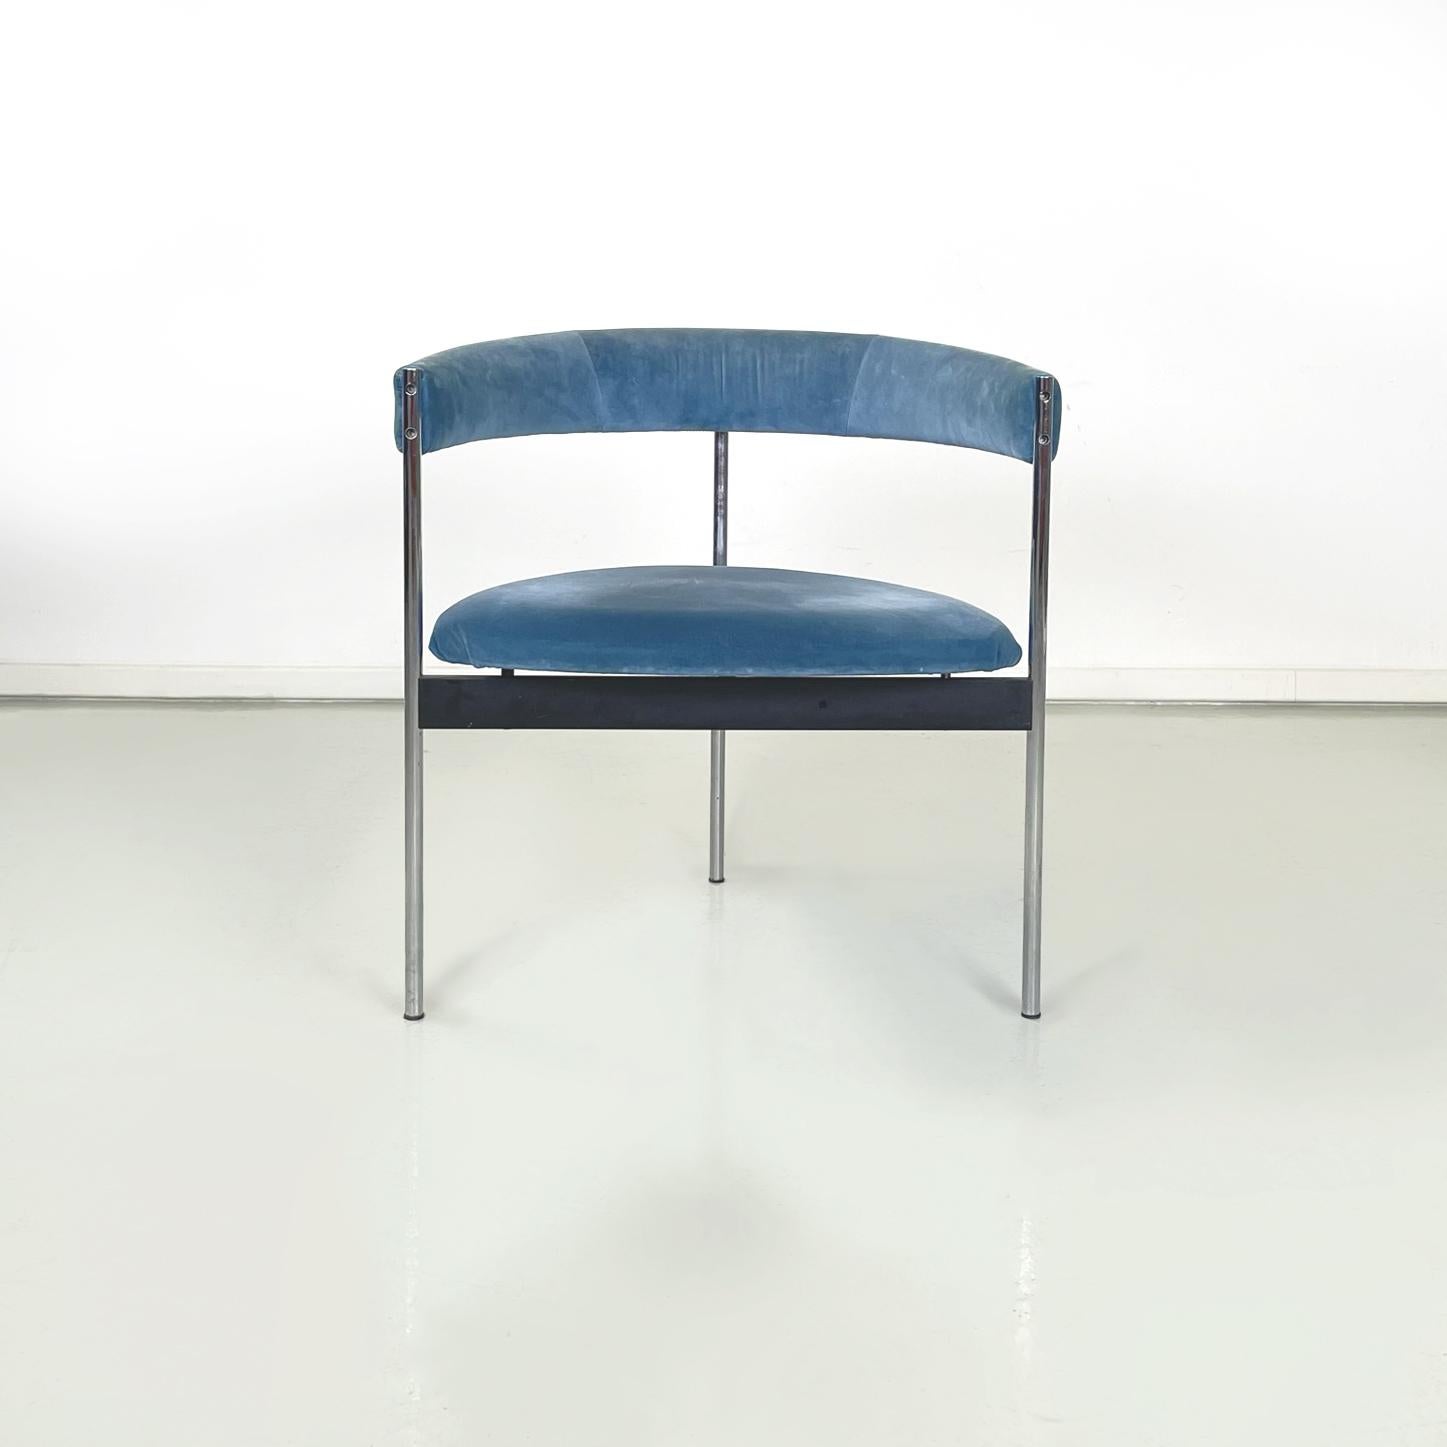 Italian modern Tub chairs in blue velvet and chromed metal, 1980s
Set of 4 tub chairs with backrest and seat, padded and  upholstered in teal blue velvet. The 3 legs are in tubular chromed metal. Structure under the seat of the T-shaped chair in